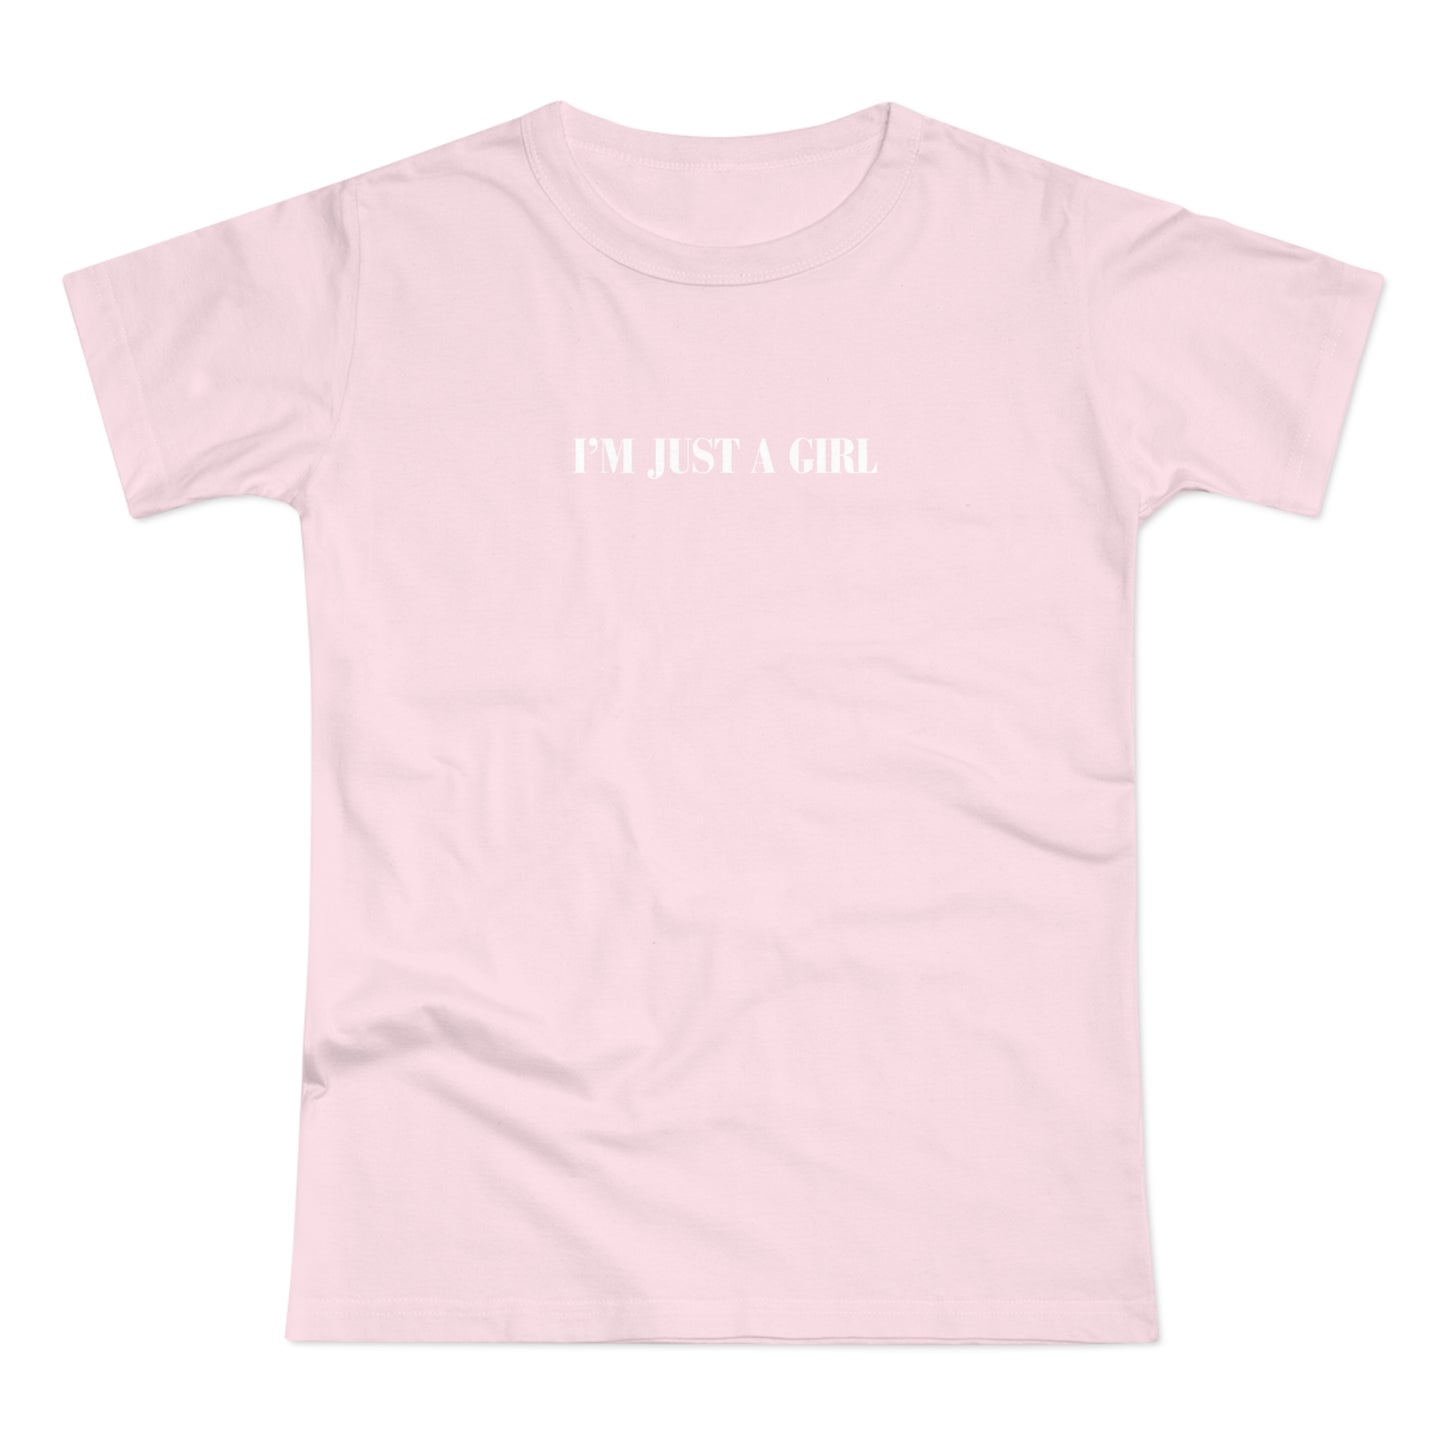 'I'm just a girl' Womens 90s Tee